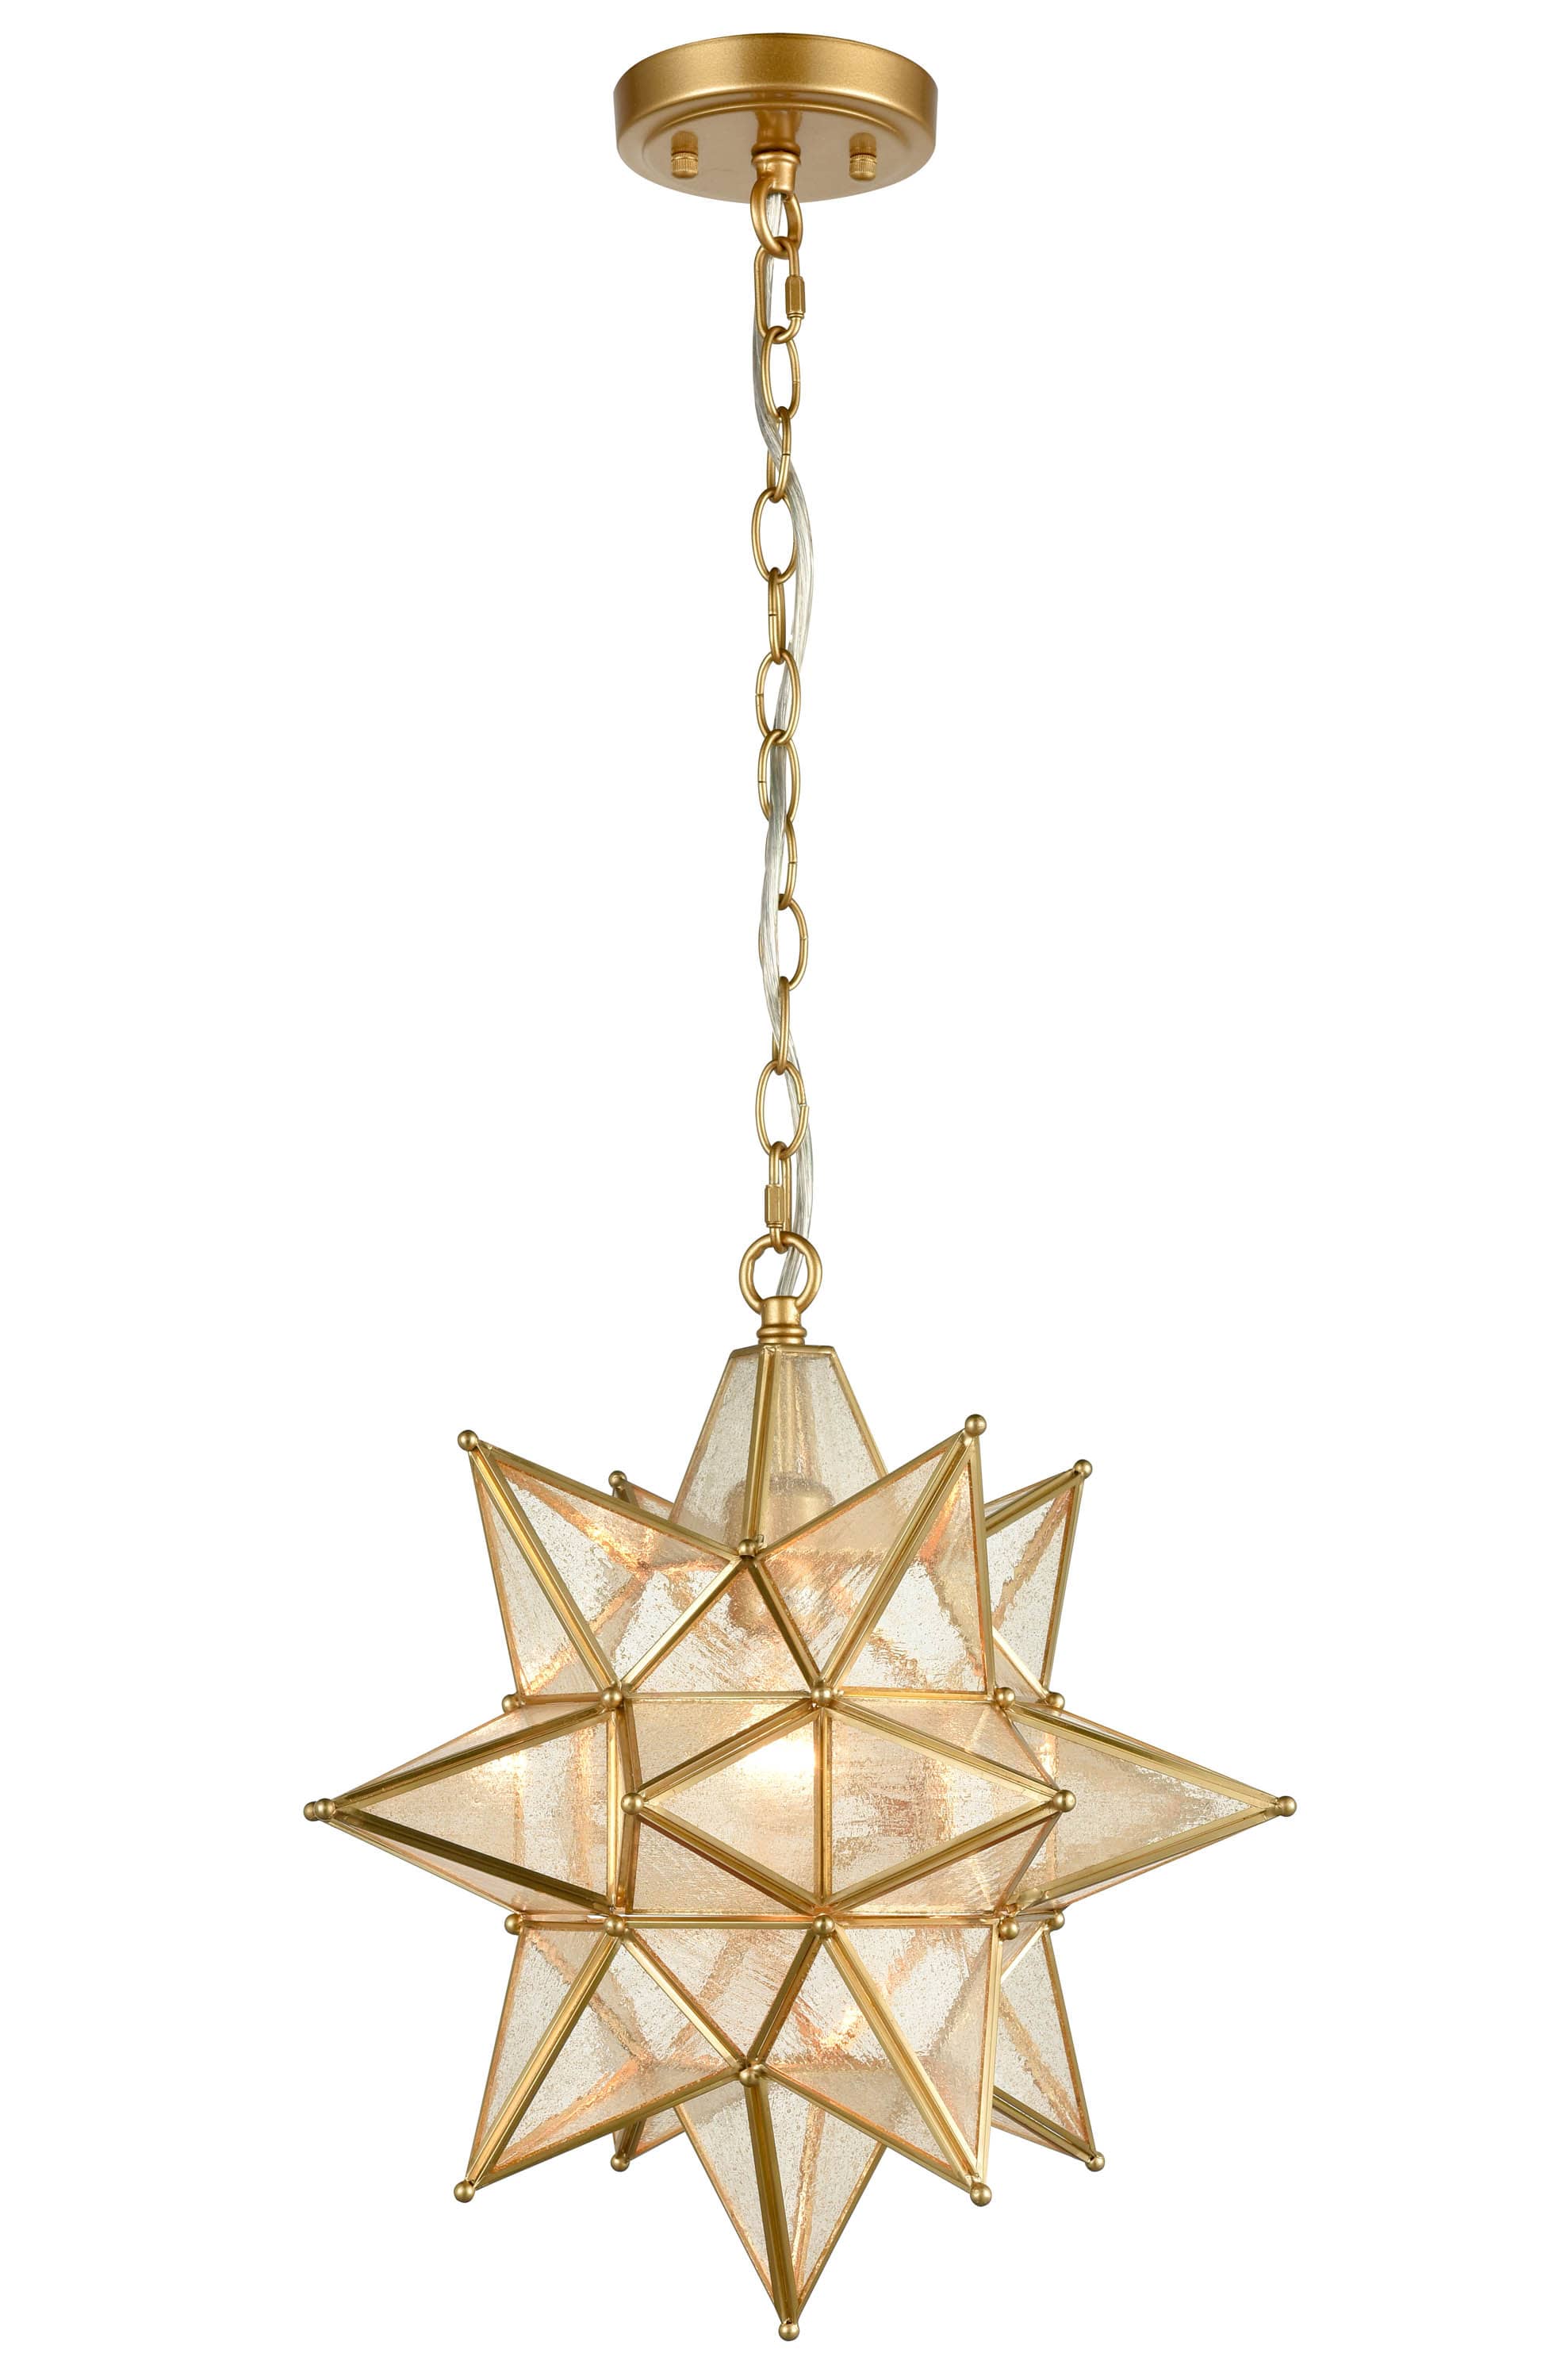 Moravian Star Pendant Chandelier Seeded Glass Gold Light 15 Inches